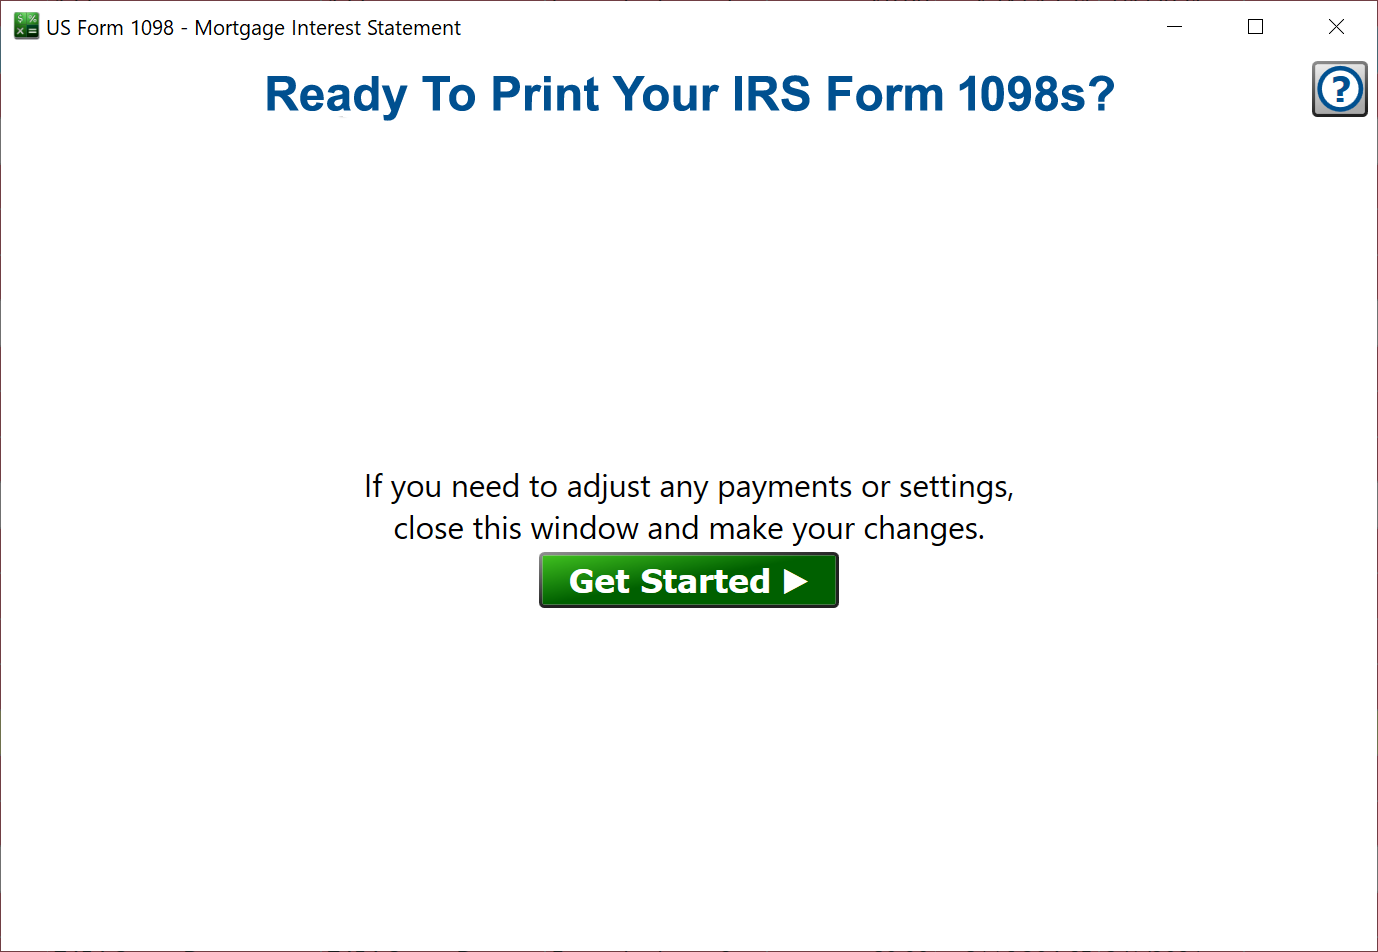 print your IRS Form 1098